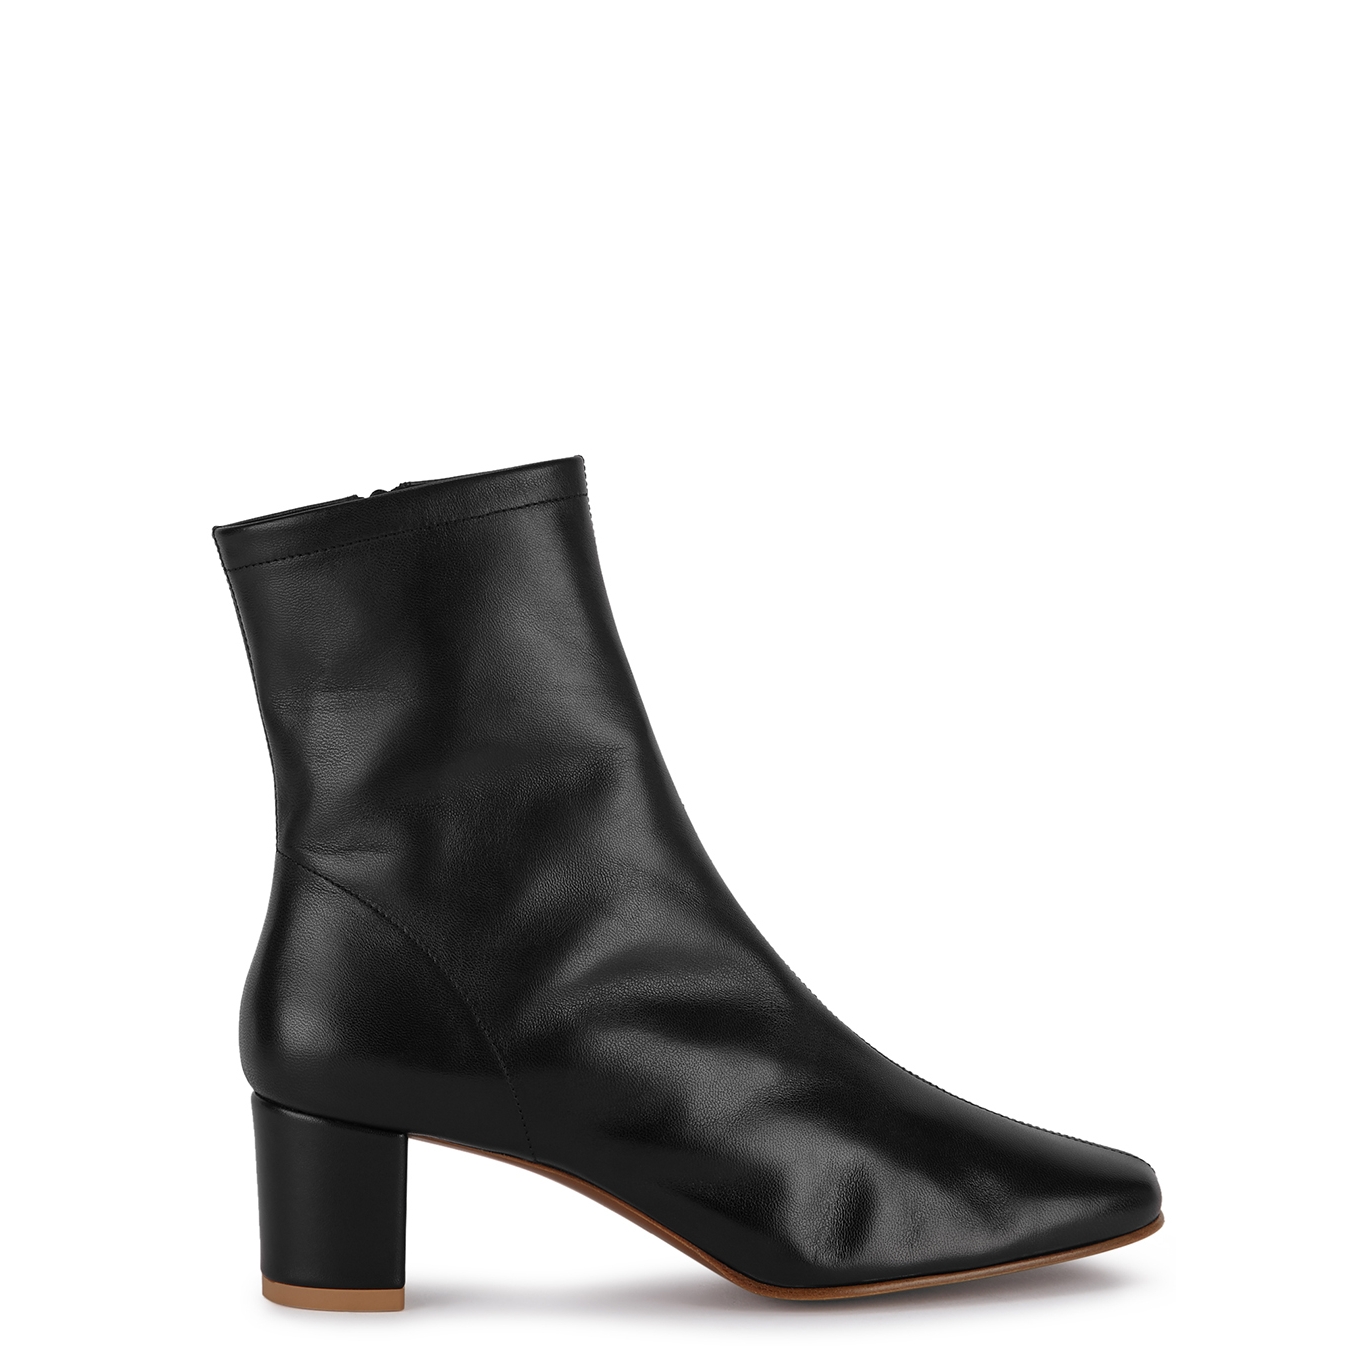 BY FAR Sofia 65 Black Leather Ankle Boots - 6